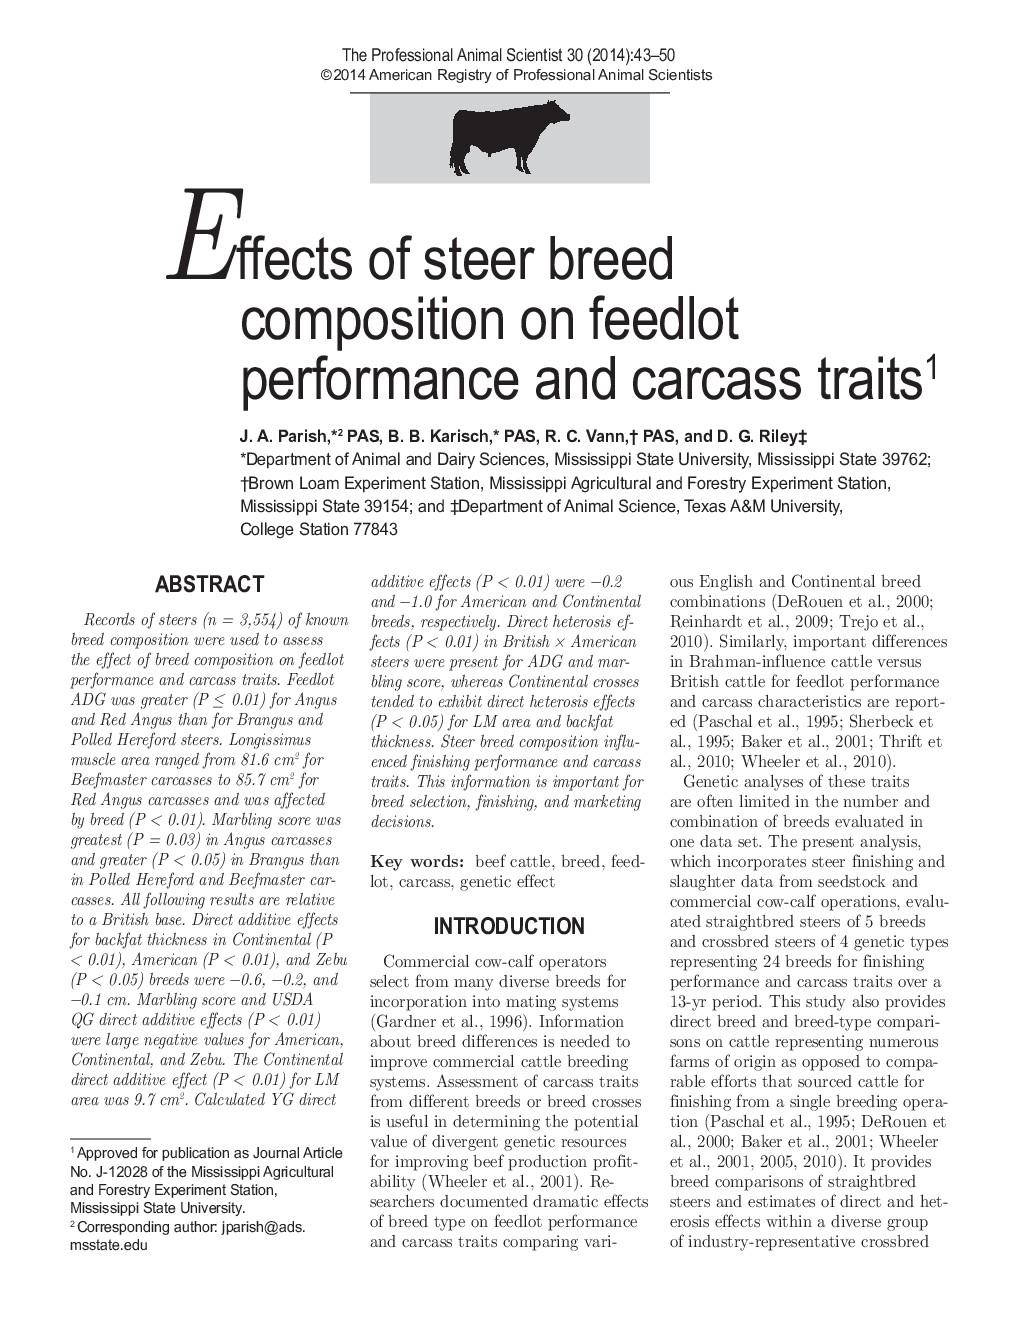 Effects of steer breed composition on feedlot performance and carcass traits1